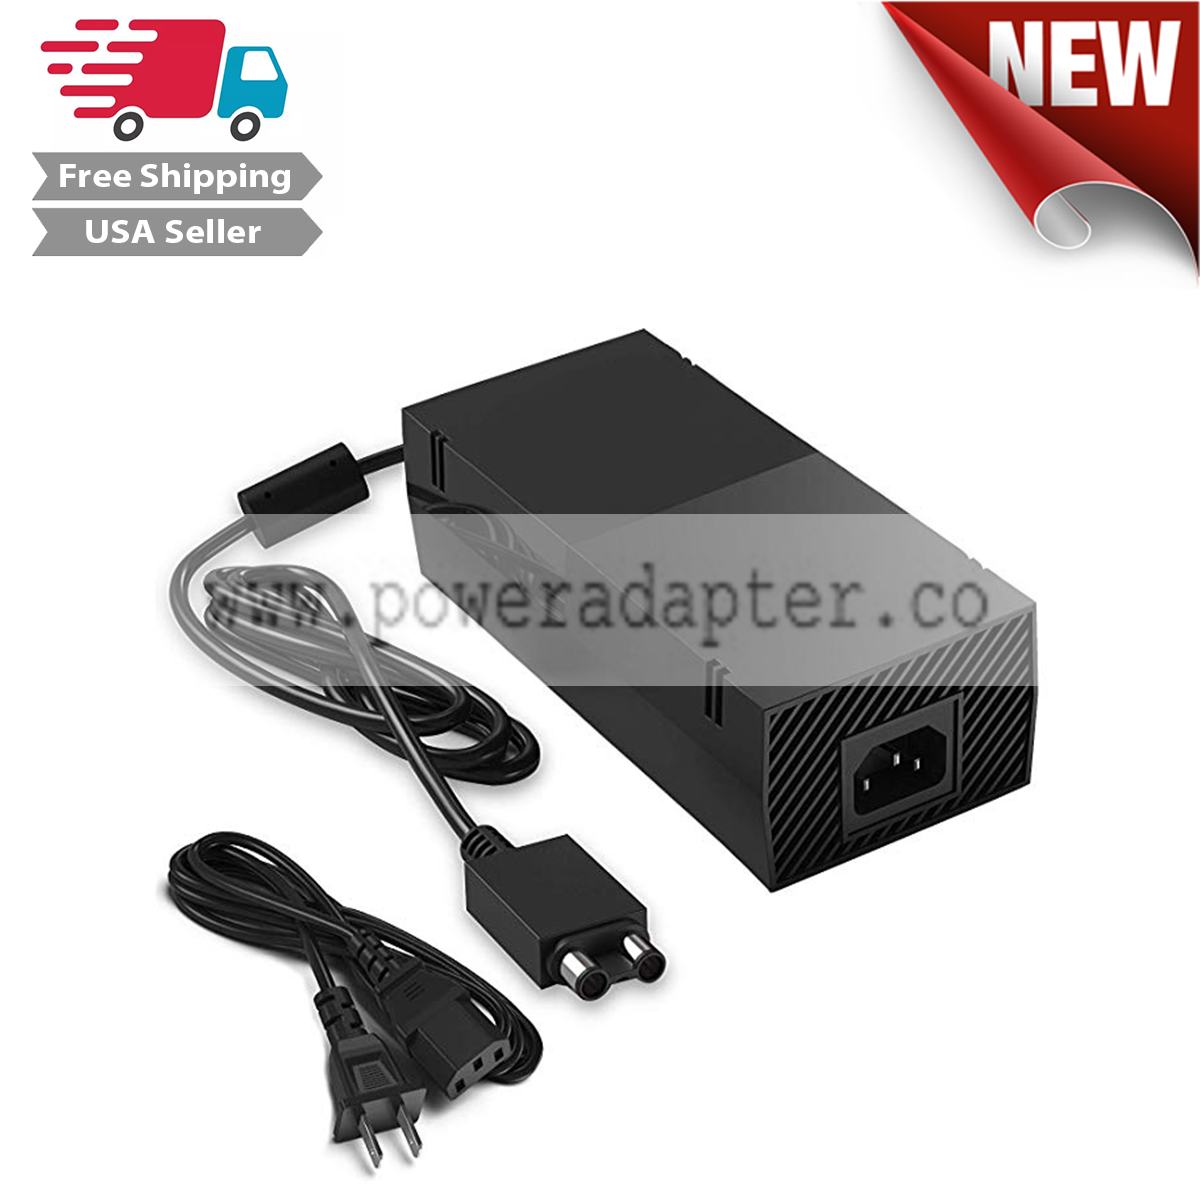 For Microsoft XBOX ONE Console AC Adapter Brick Charger Power Supply Cord Cable Weight: 1.45 pounds Brand: Xbox One